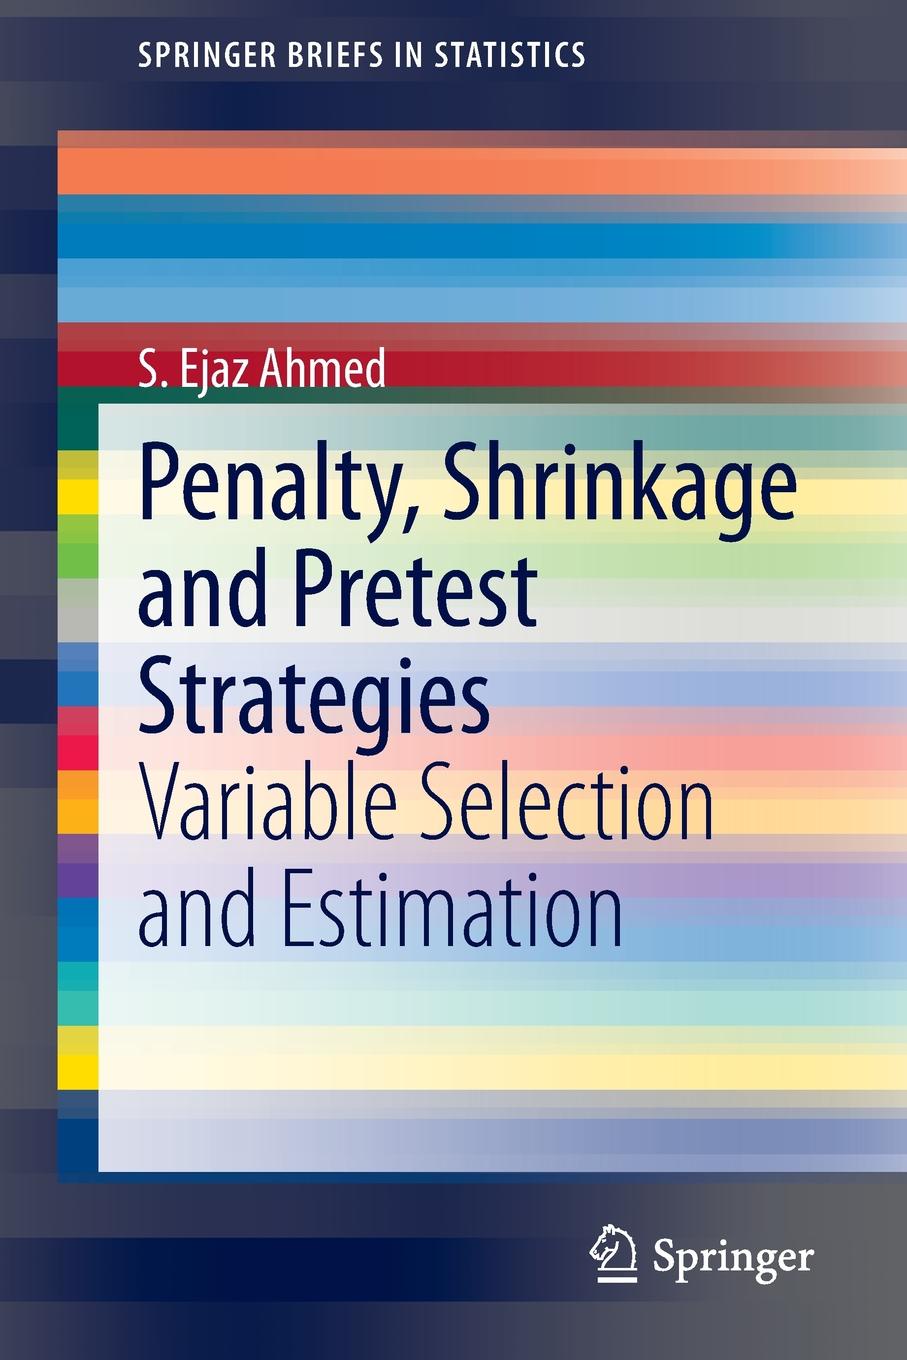 Penalty, Shrinkage and Pretest Strategies. Variable Selection and Estimation